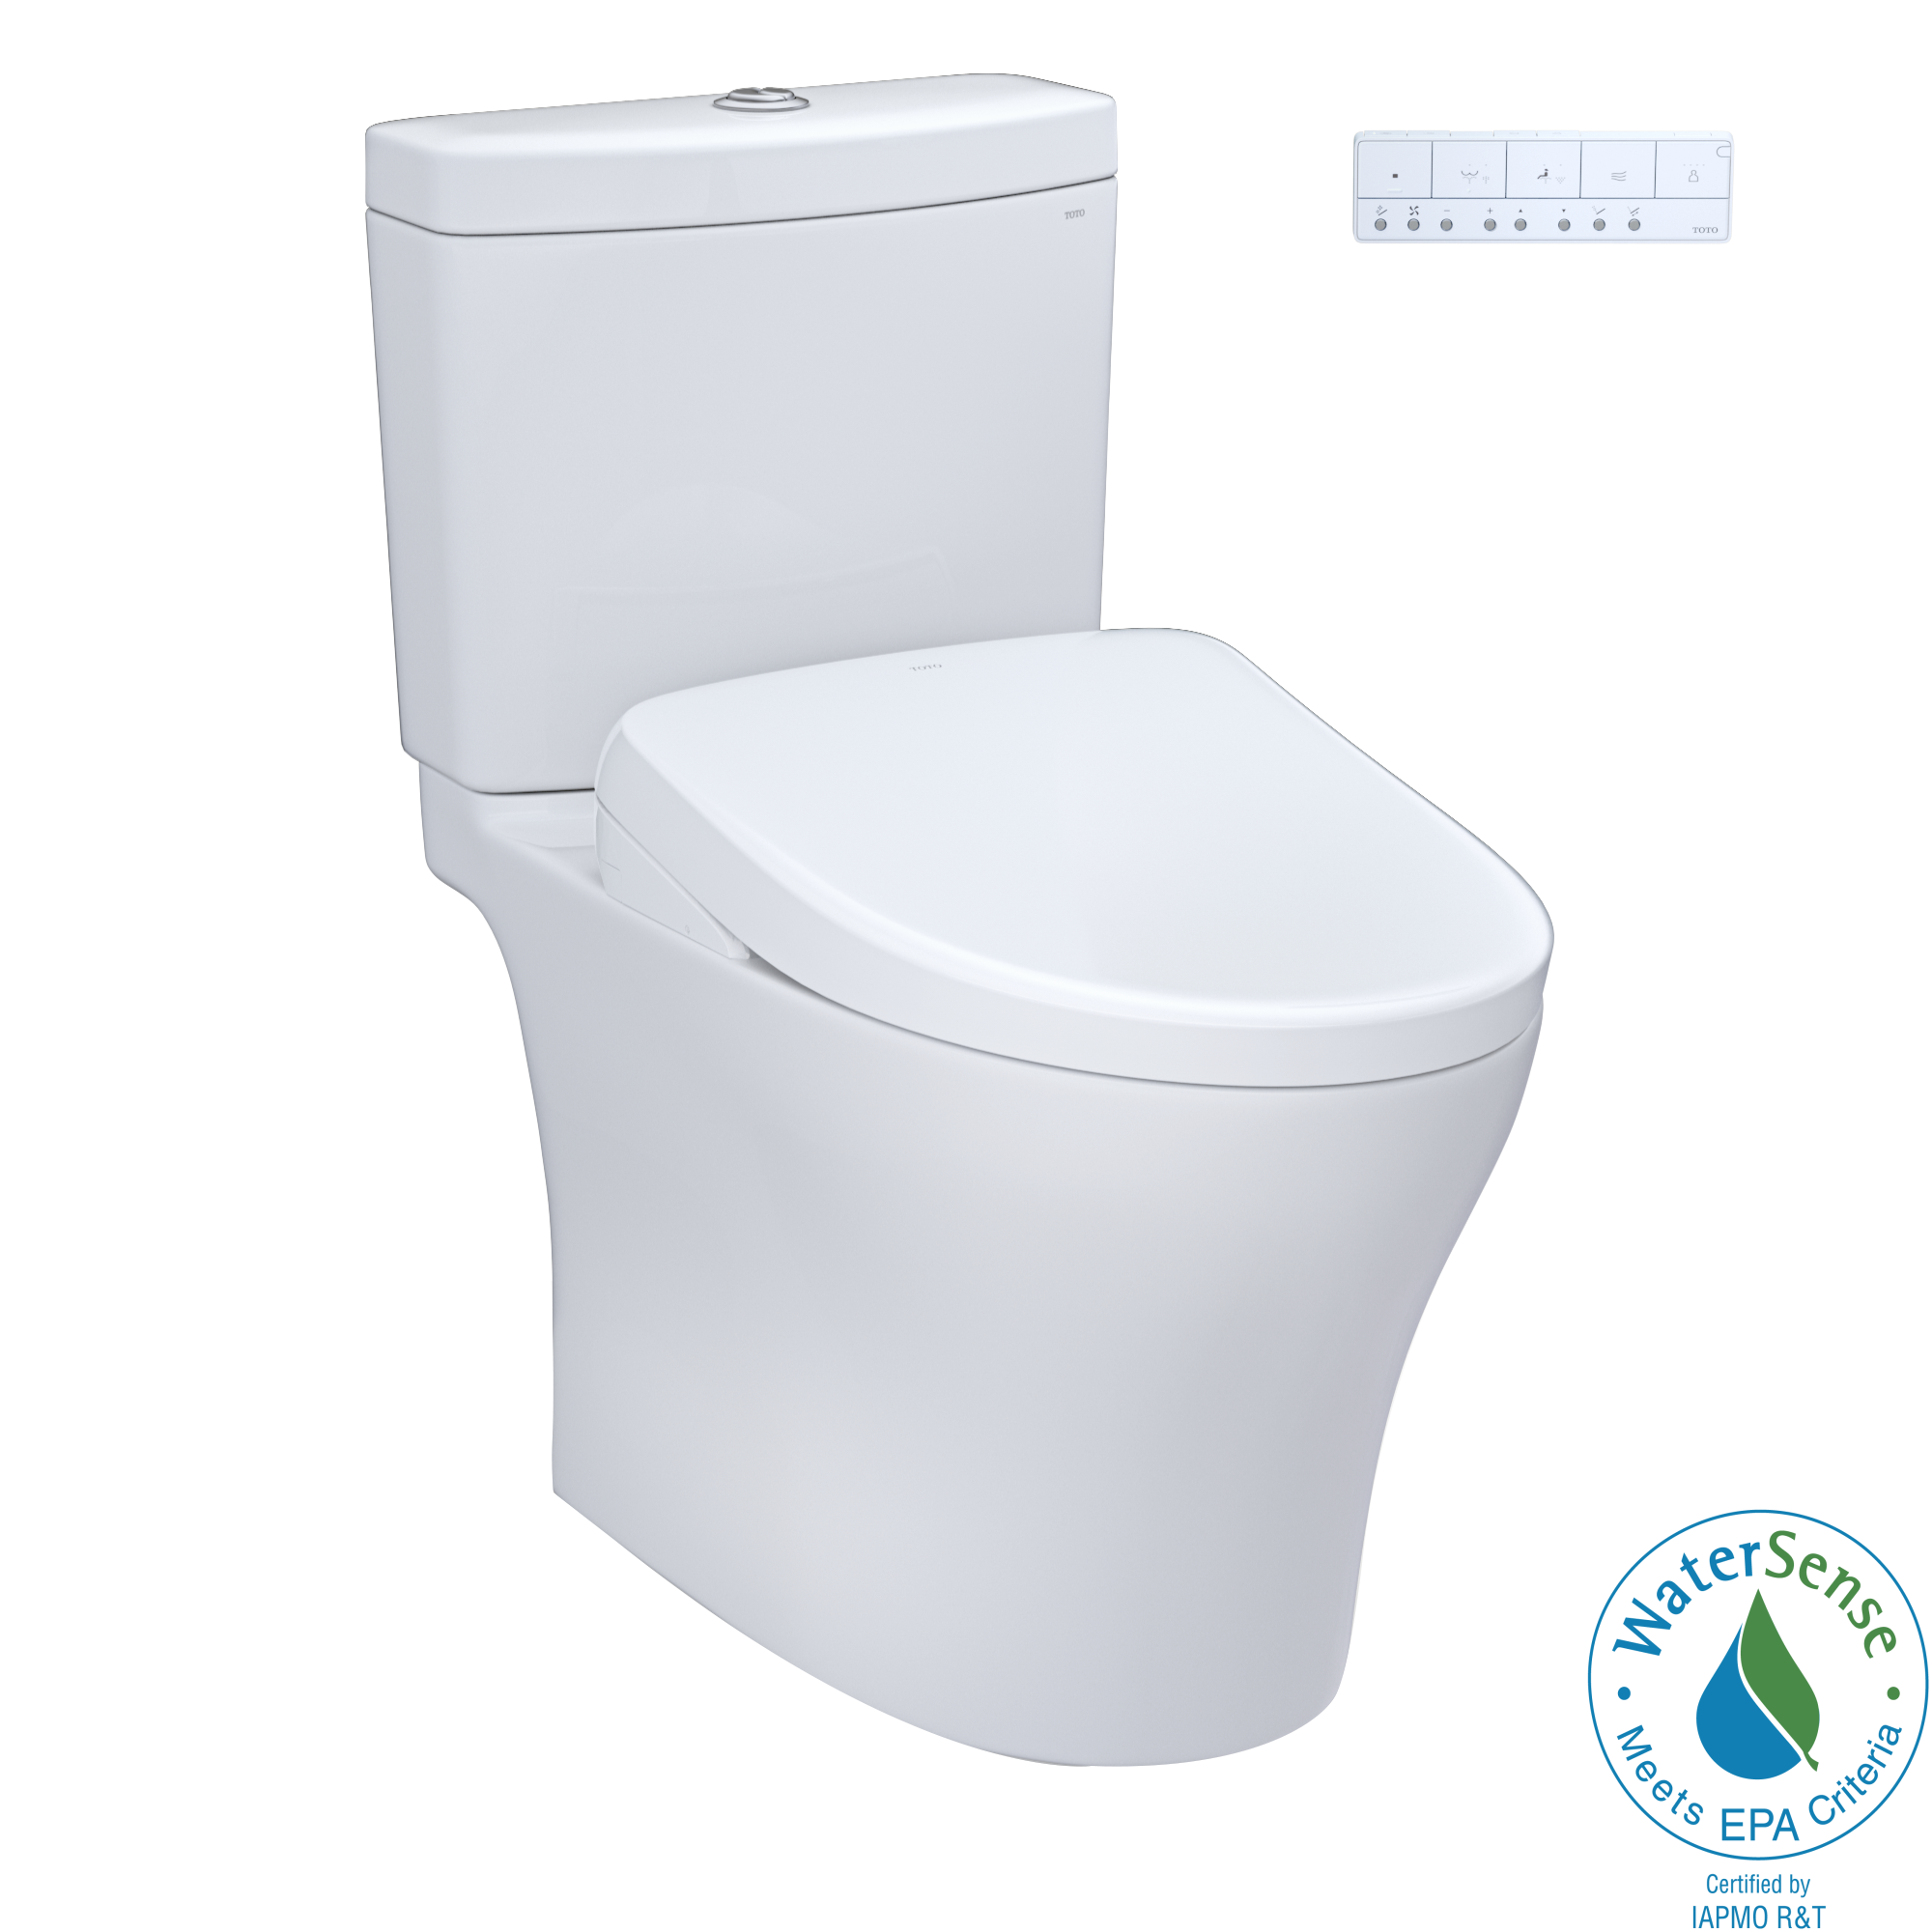 TOTO WASHLET+ Aquia IV Two-Piece Elongated Dual Flush 1.28 and 0.9 GPF Toilet and Contemporary WASHLET S7 Contemporary Bidet Seat, Cotton White - MW4464726CEMGN#01, MW4464726CEMGNA#01